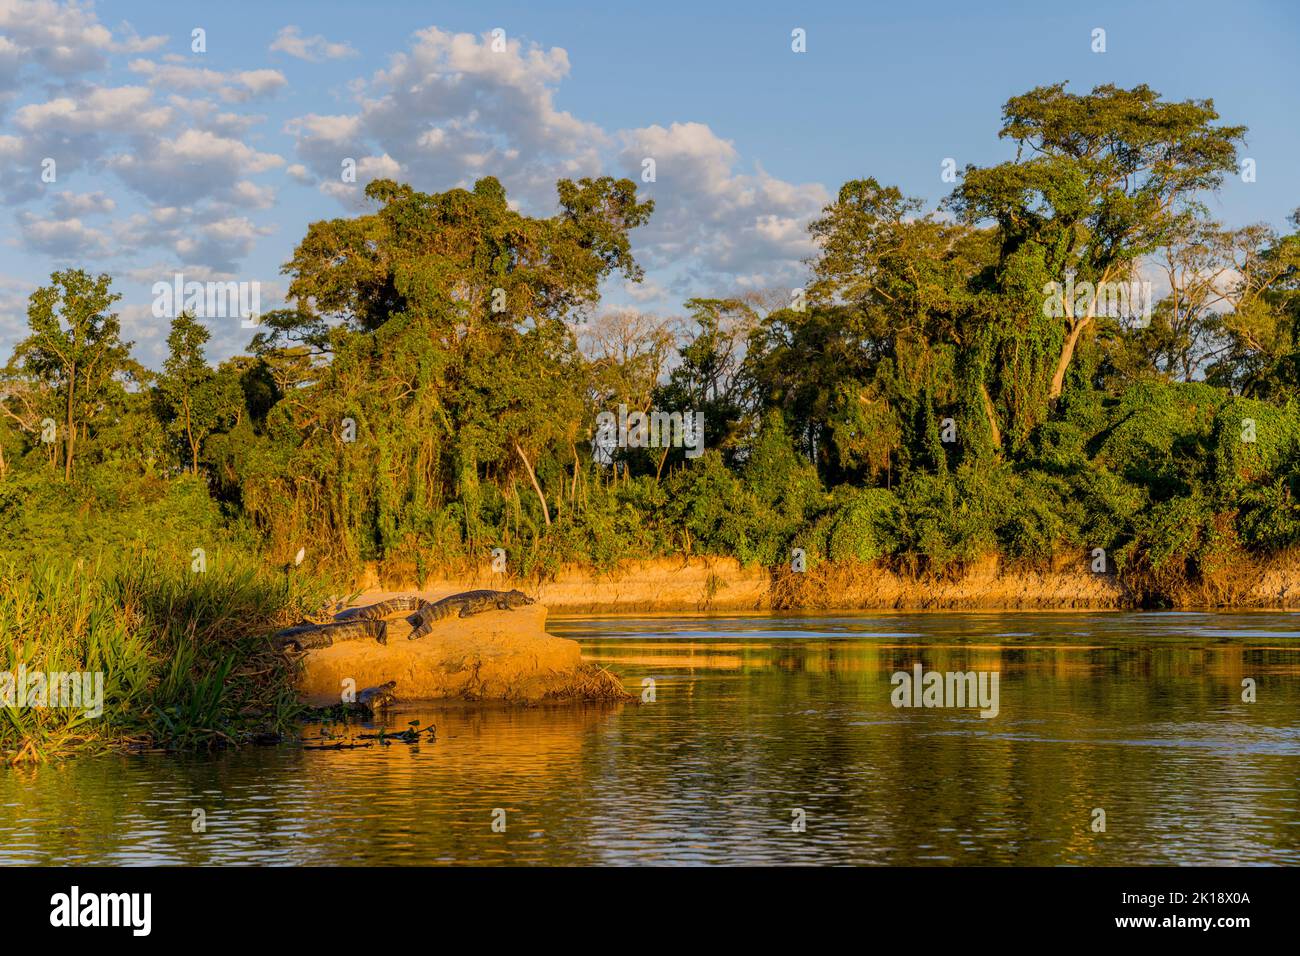 Yacare caimans (Caiman yacare) in the evening sunshine on a sandy beach along a tributary of the Cuiaba River near Porto Jofre in the northern Pantana Stock Photo